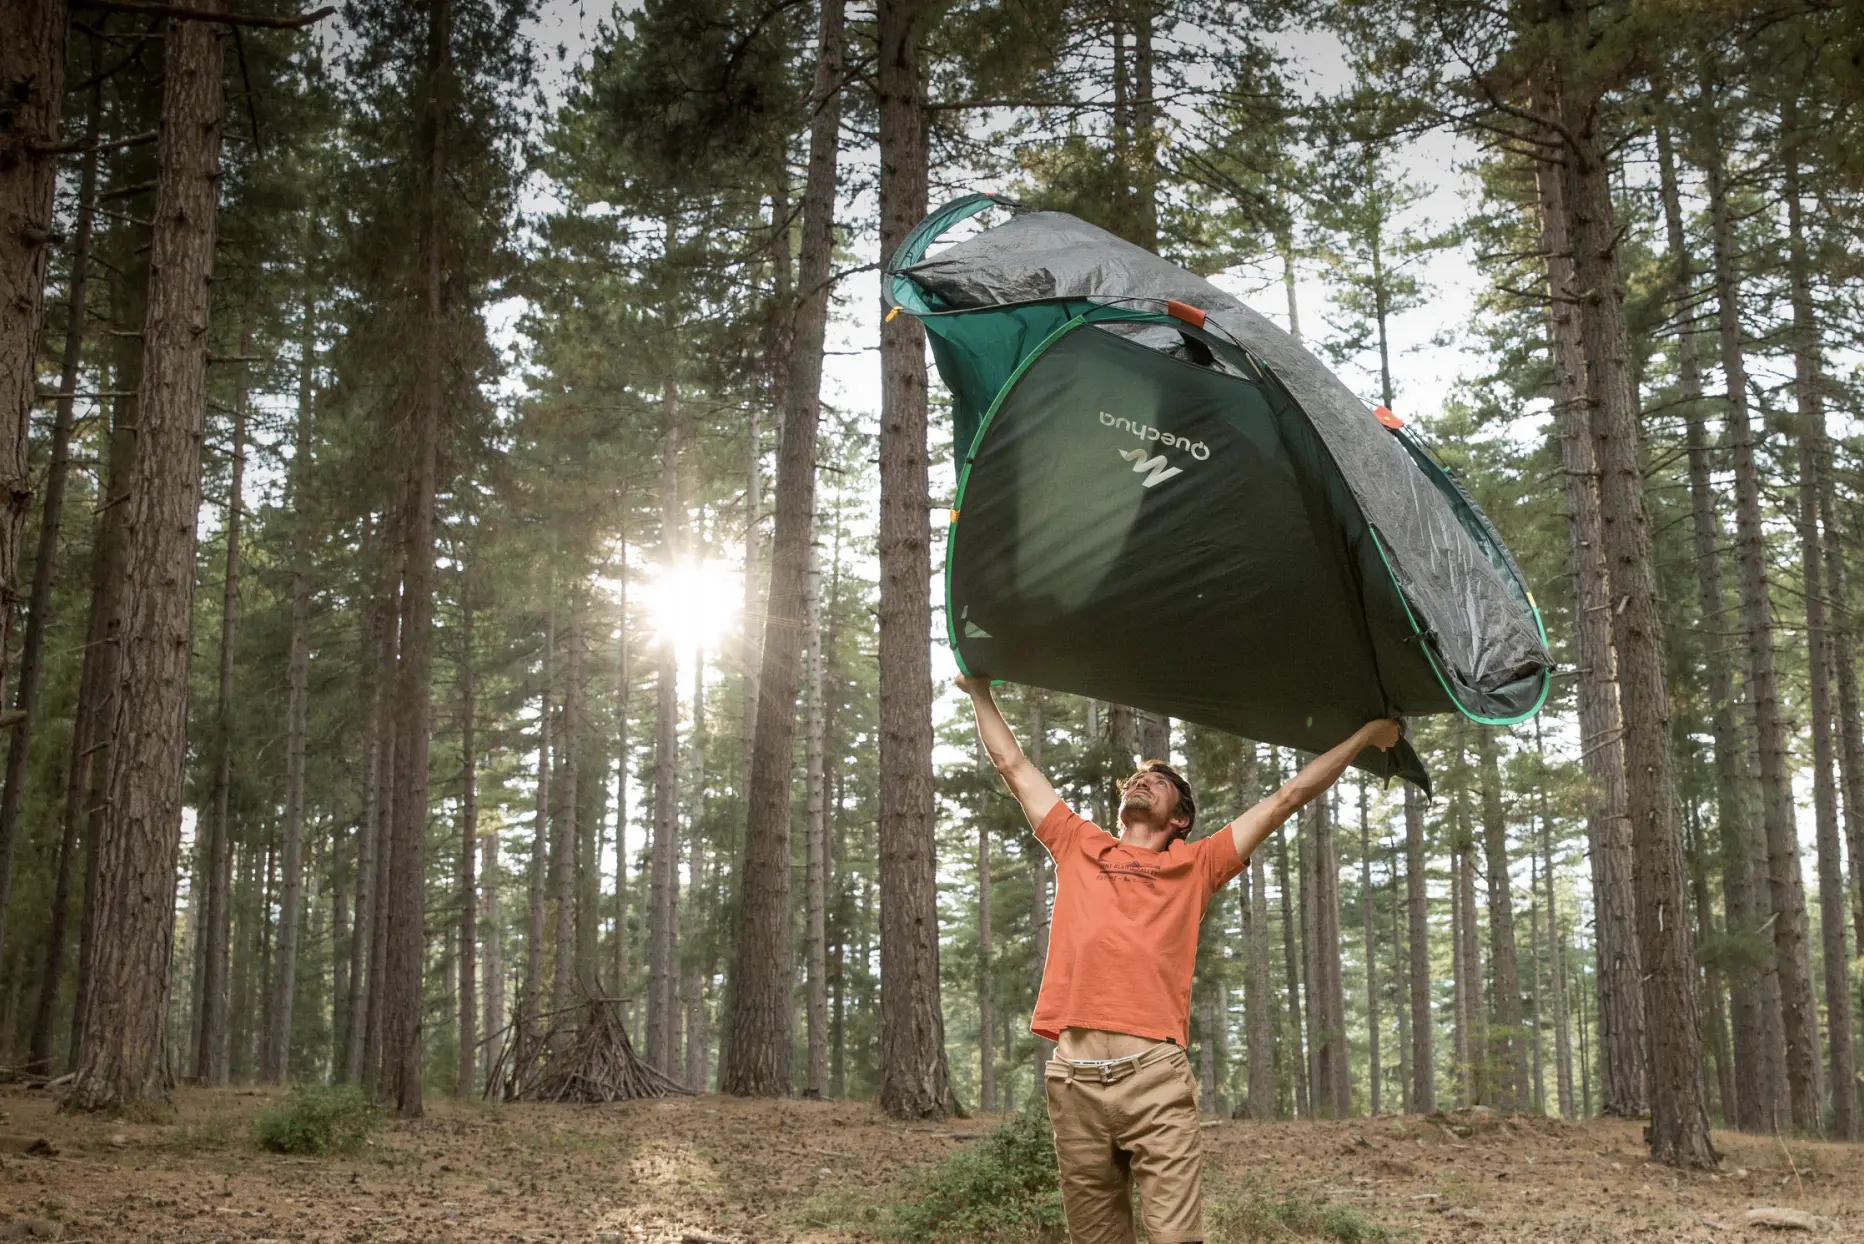 How to Keep Your Tent in Good Condition